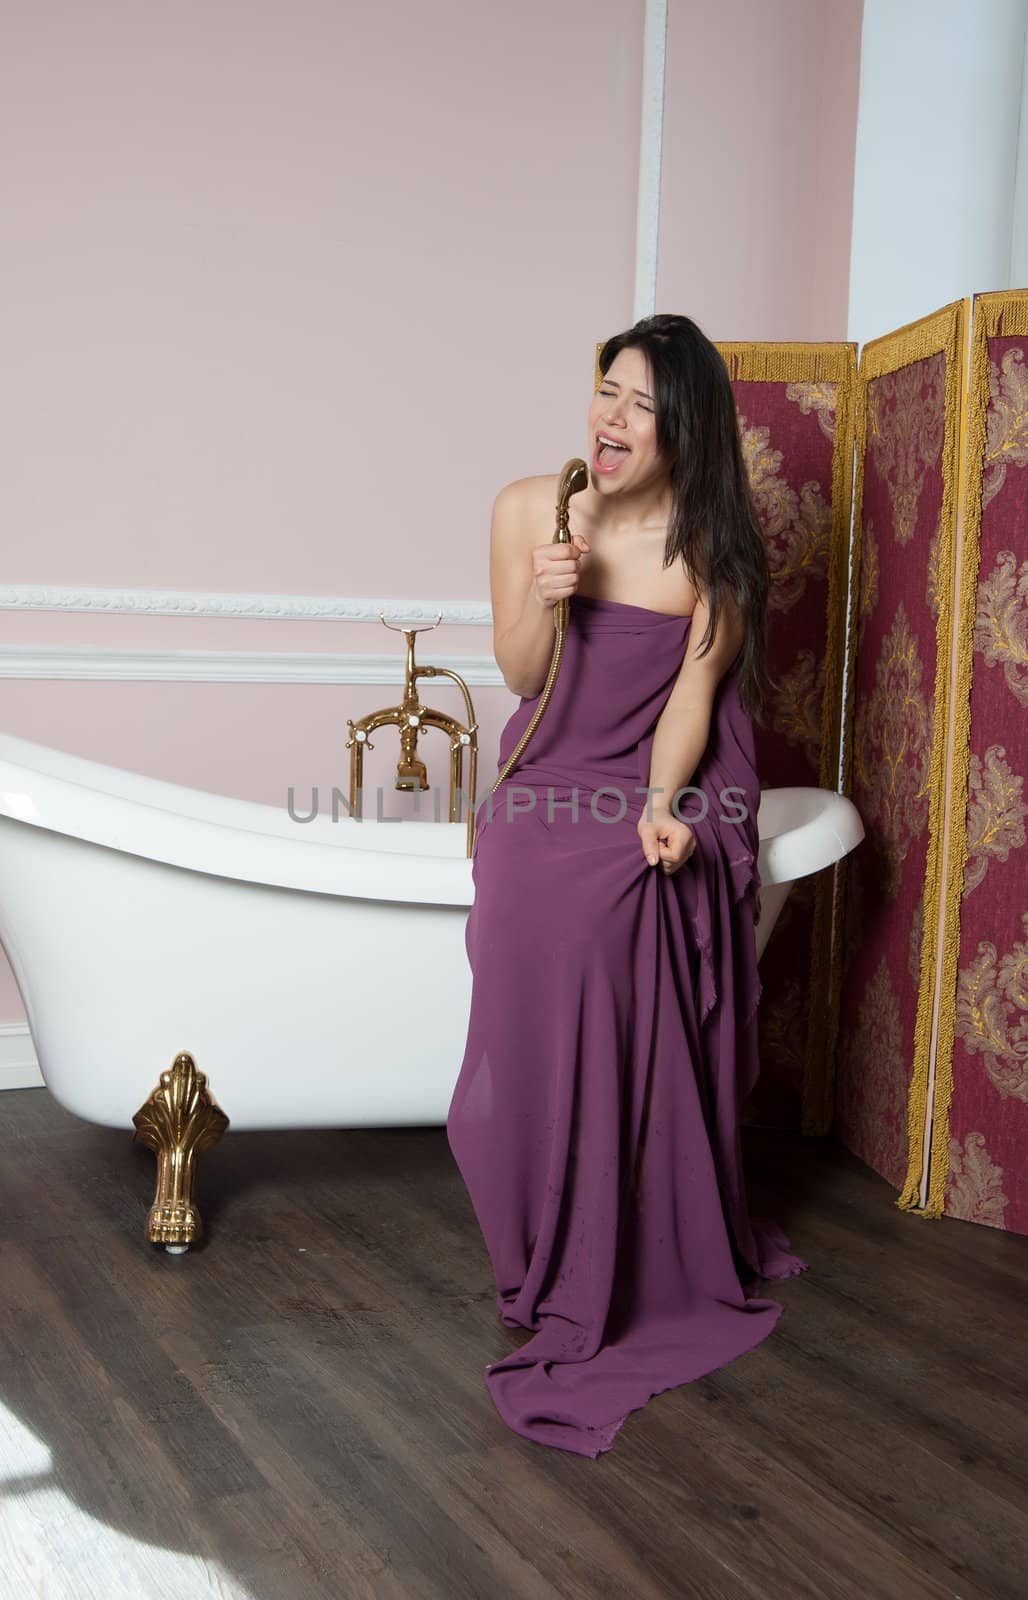 woman in tissue sings in the shower while sitting on the bathtub